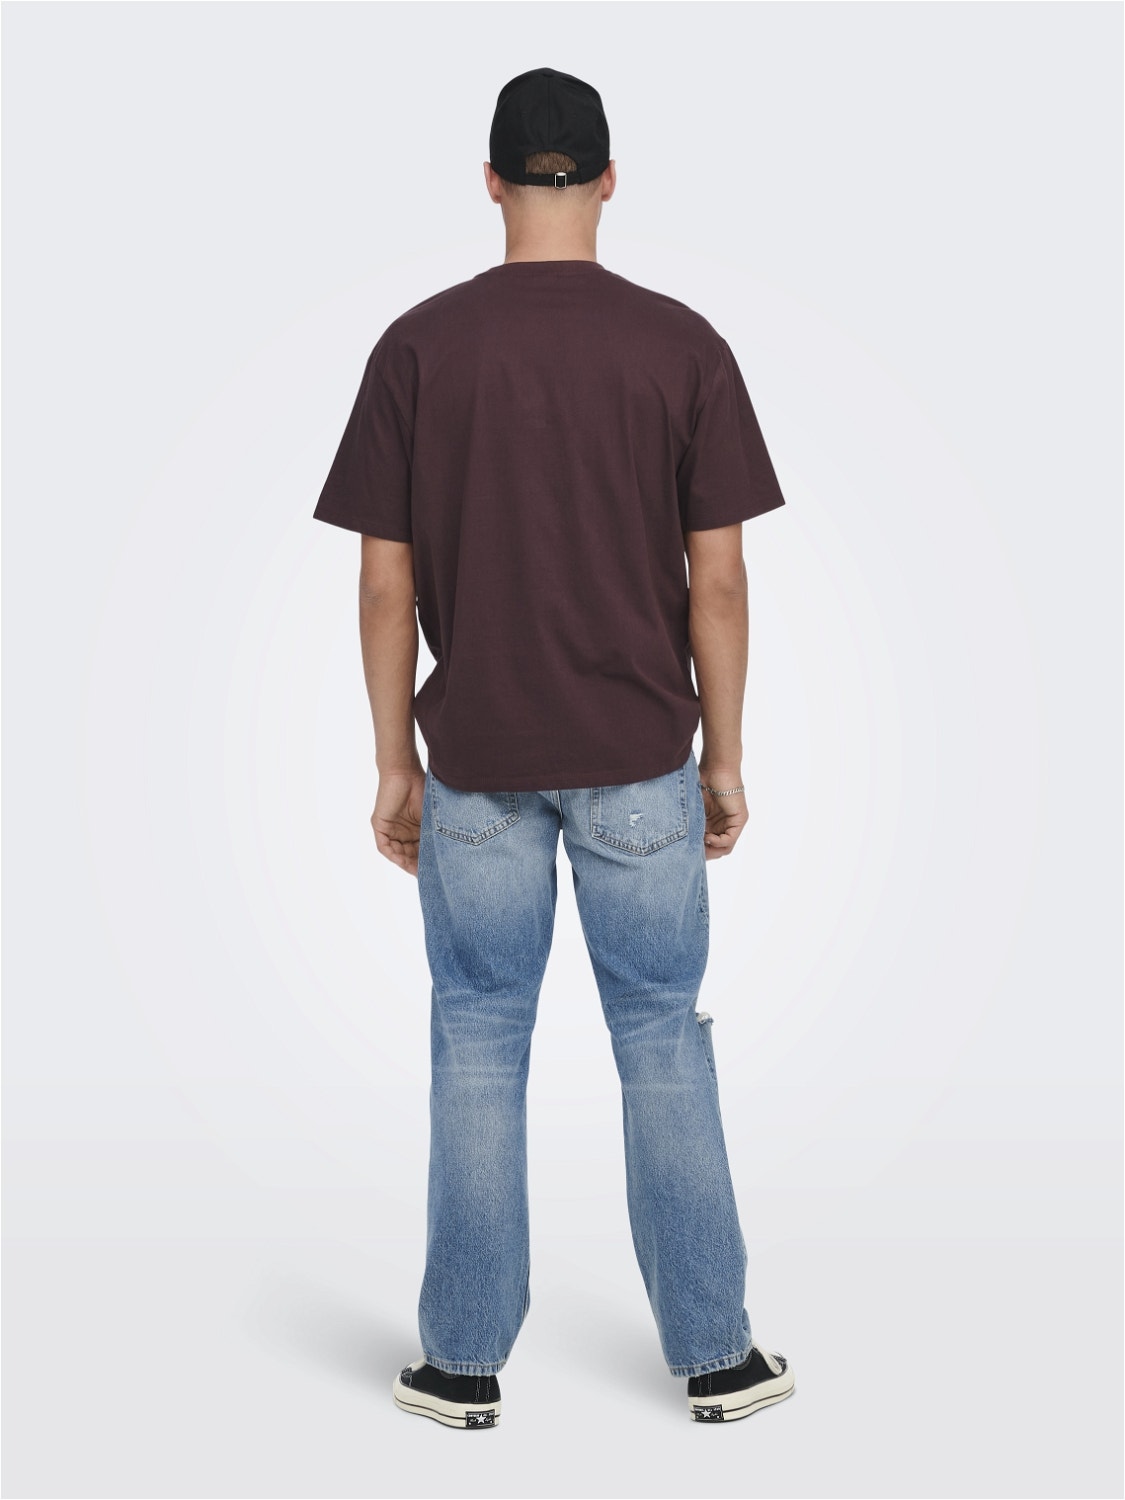 ONLY & SONS Oversized o-hals t-shirt -Fudge - 22022532